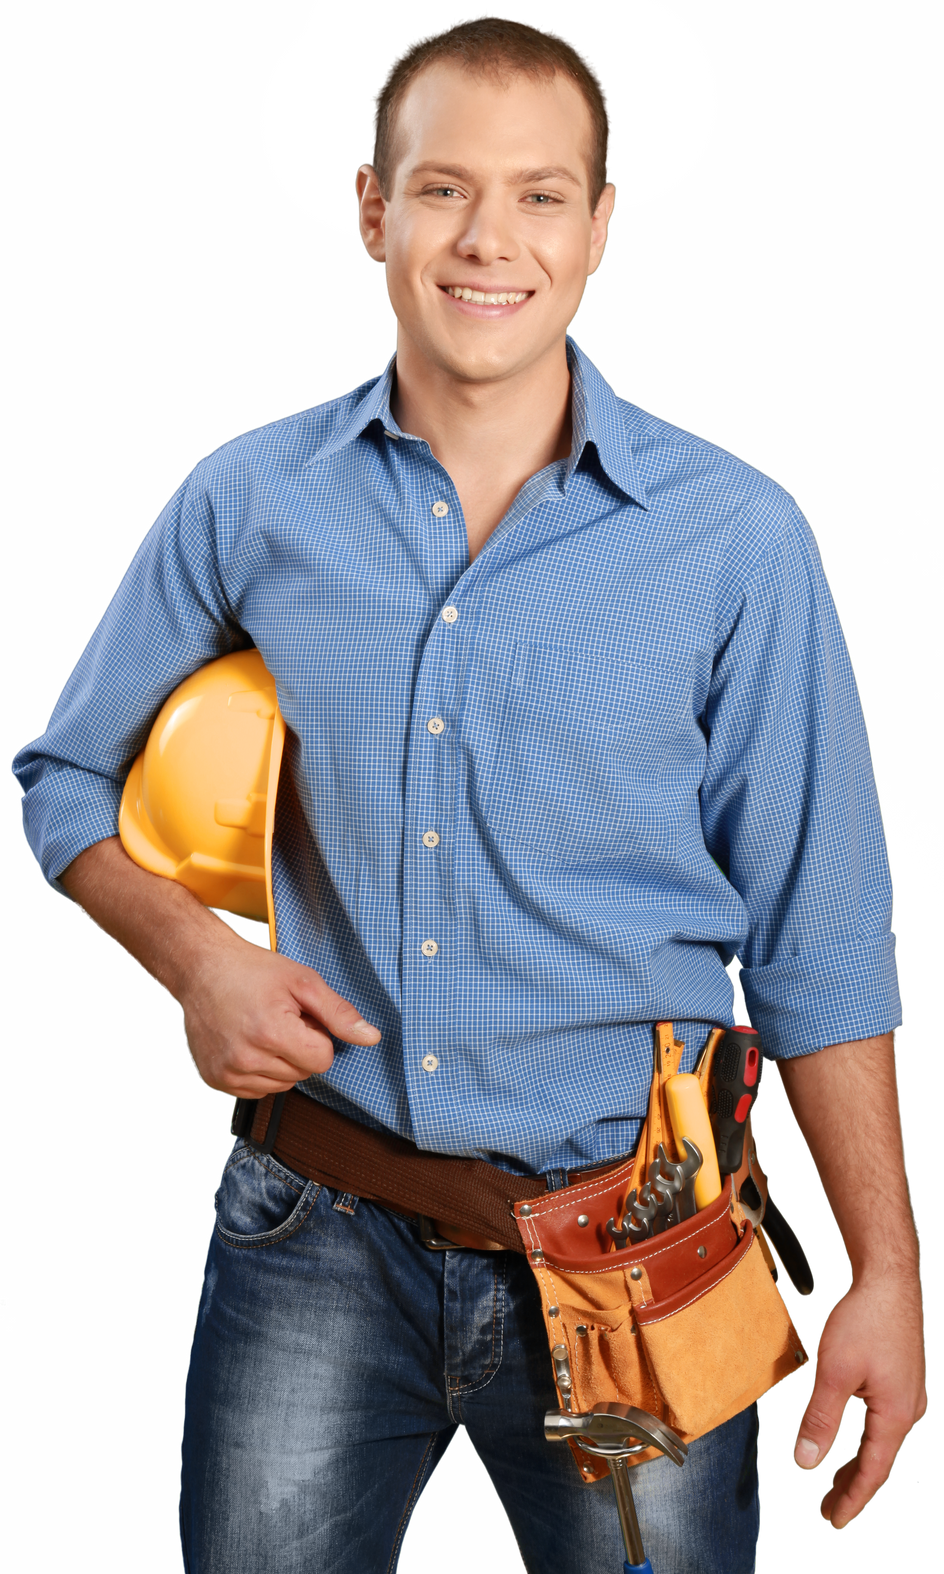 Friendly Construction Worker 